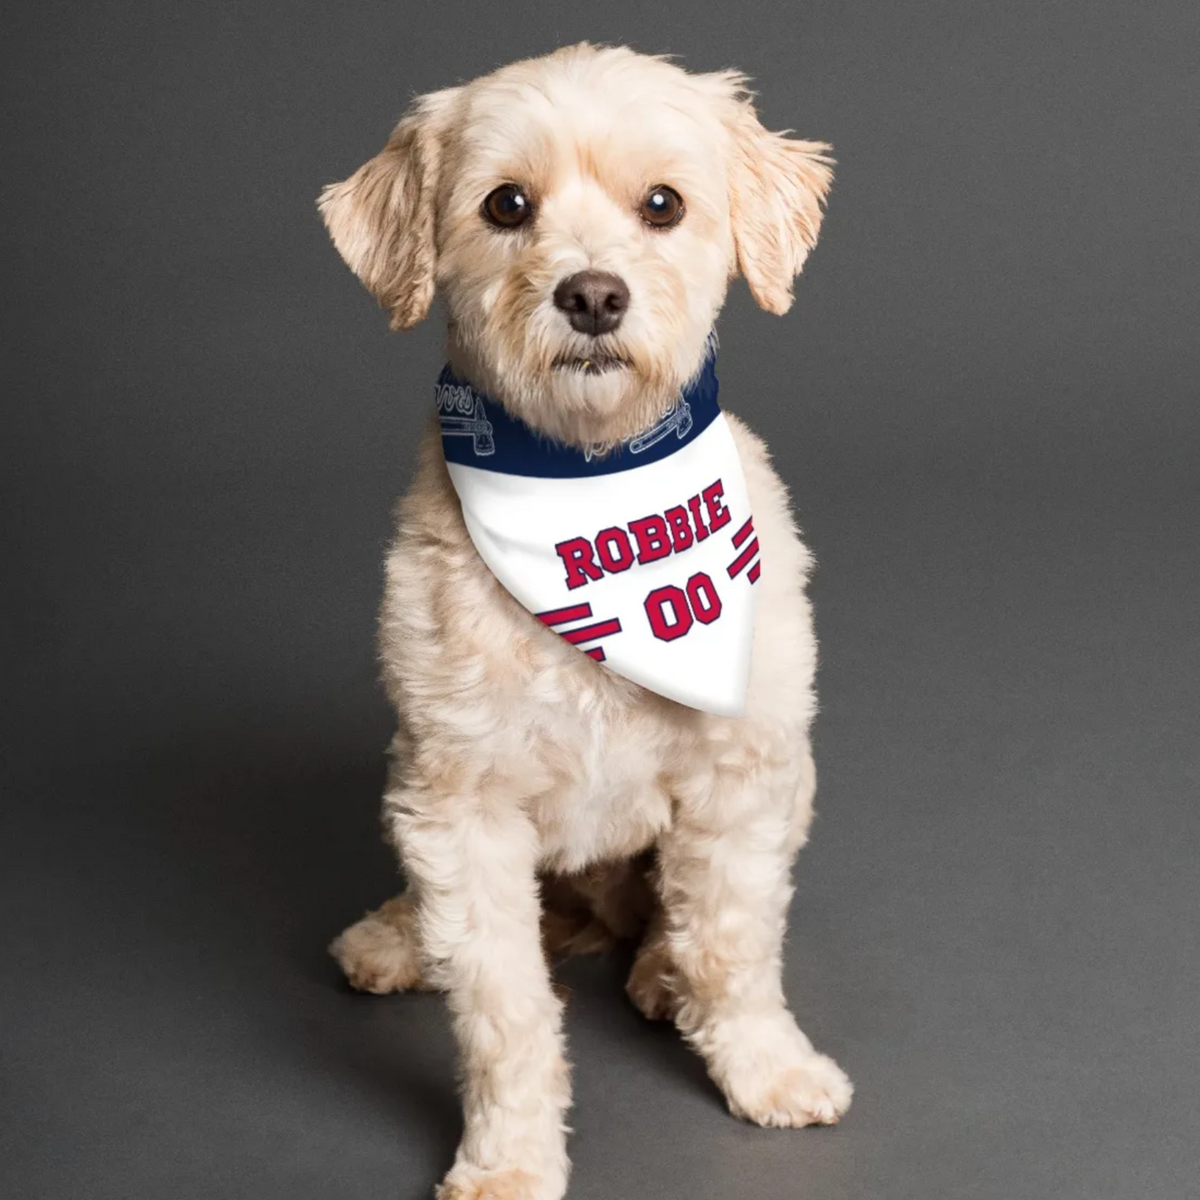 Atlanta Braves - It's #NationalPuppyDay! We want to see your furry